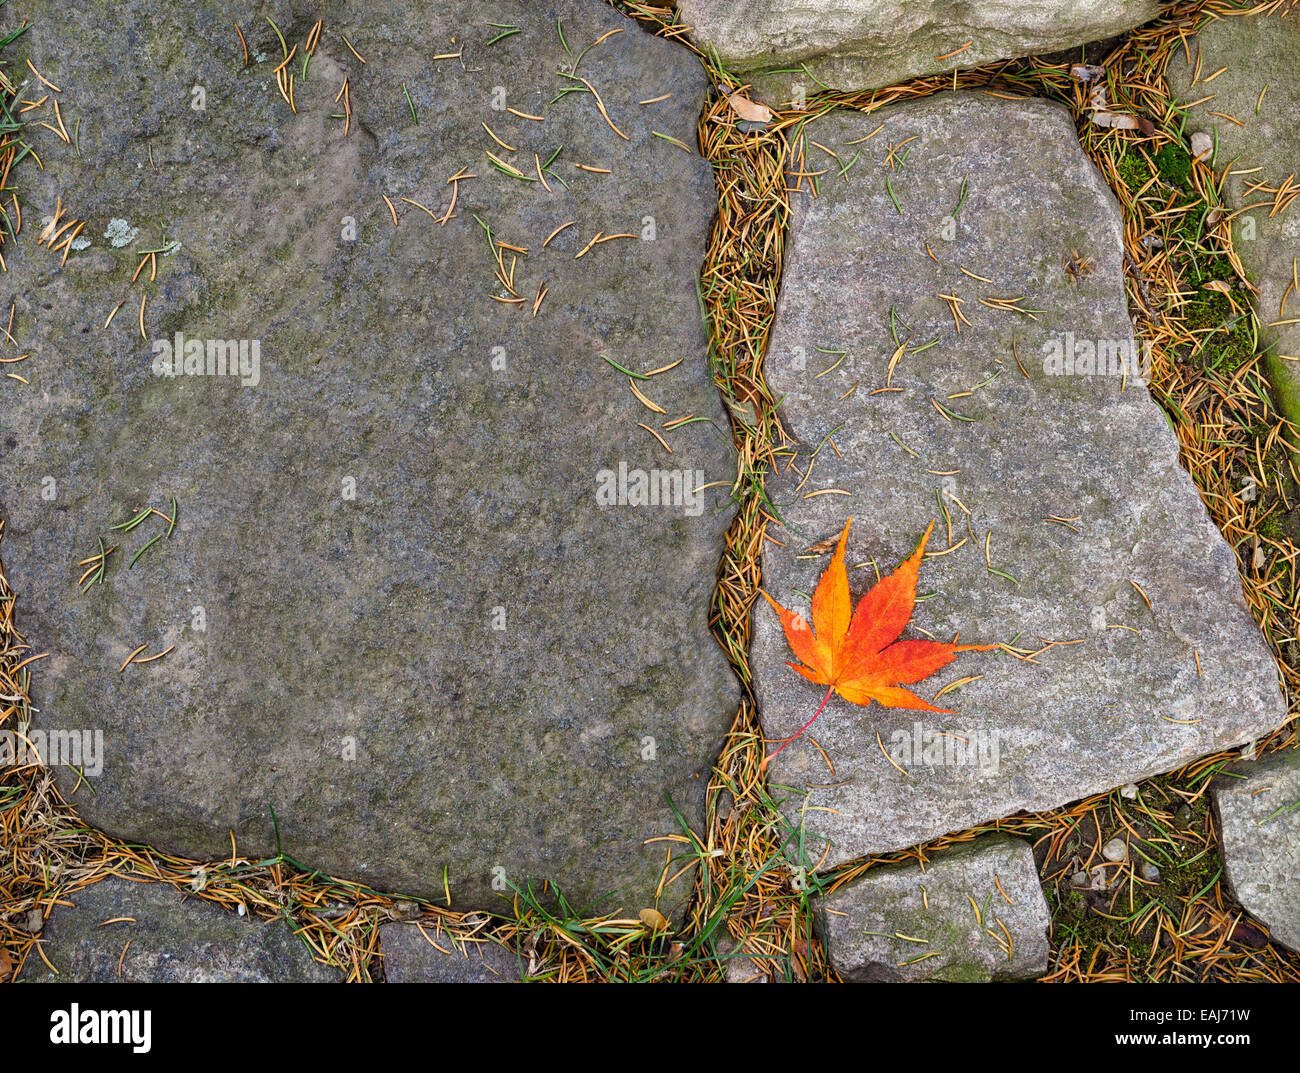 A single leaf gold red orange fall Japanese maple leaf fallen on a paving stone on an autumn day. Copy space with abstract feel. Stock Photo